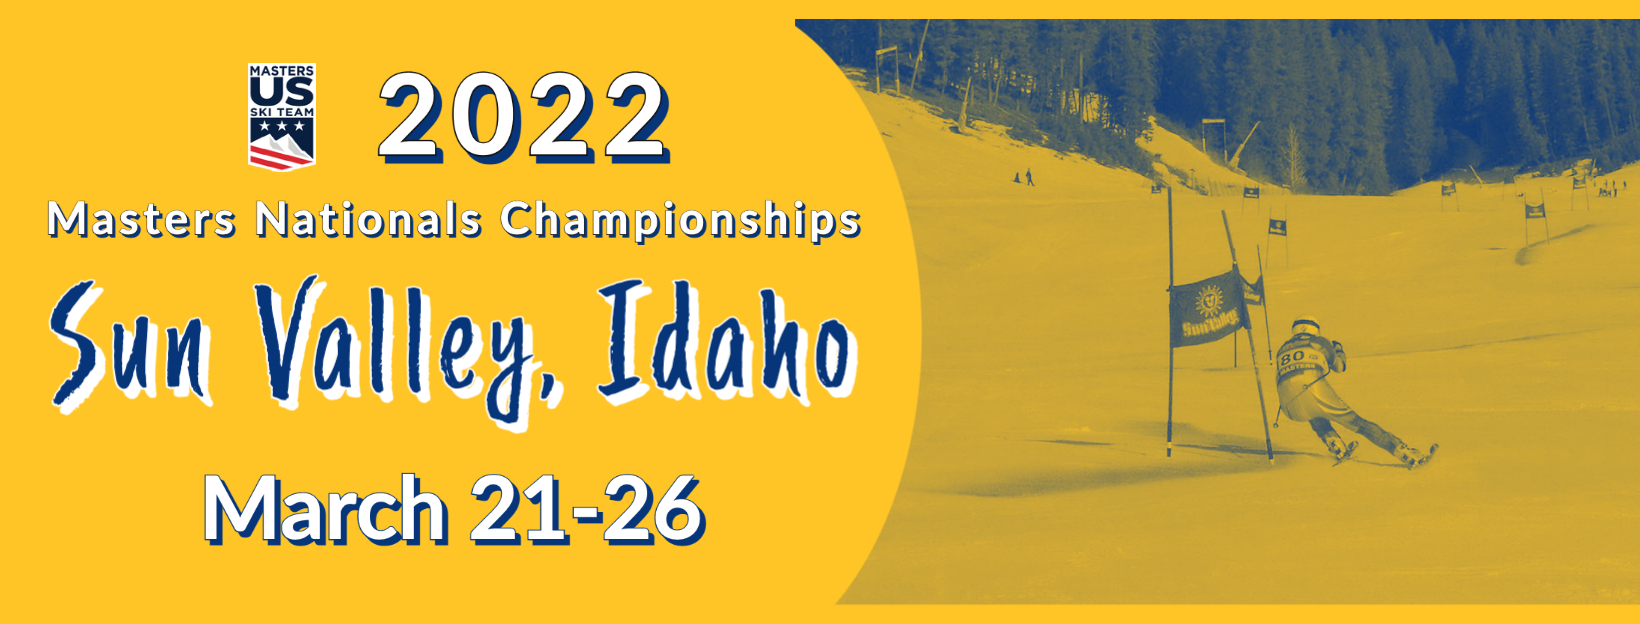 2022 Nationals at Sun Valley March 21-26